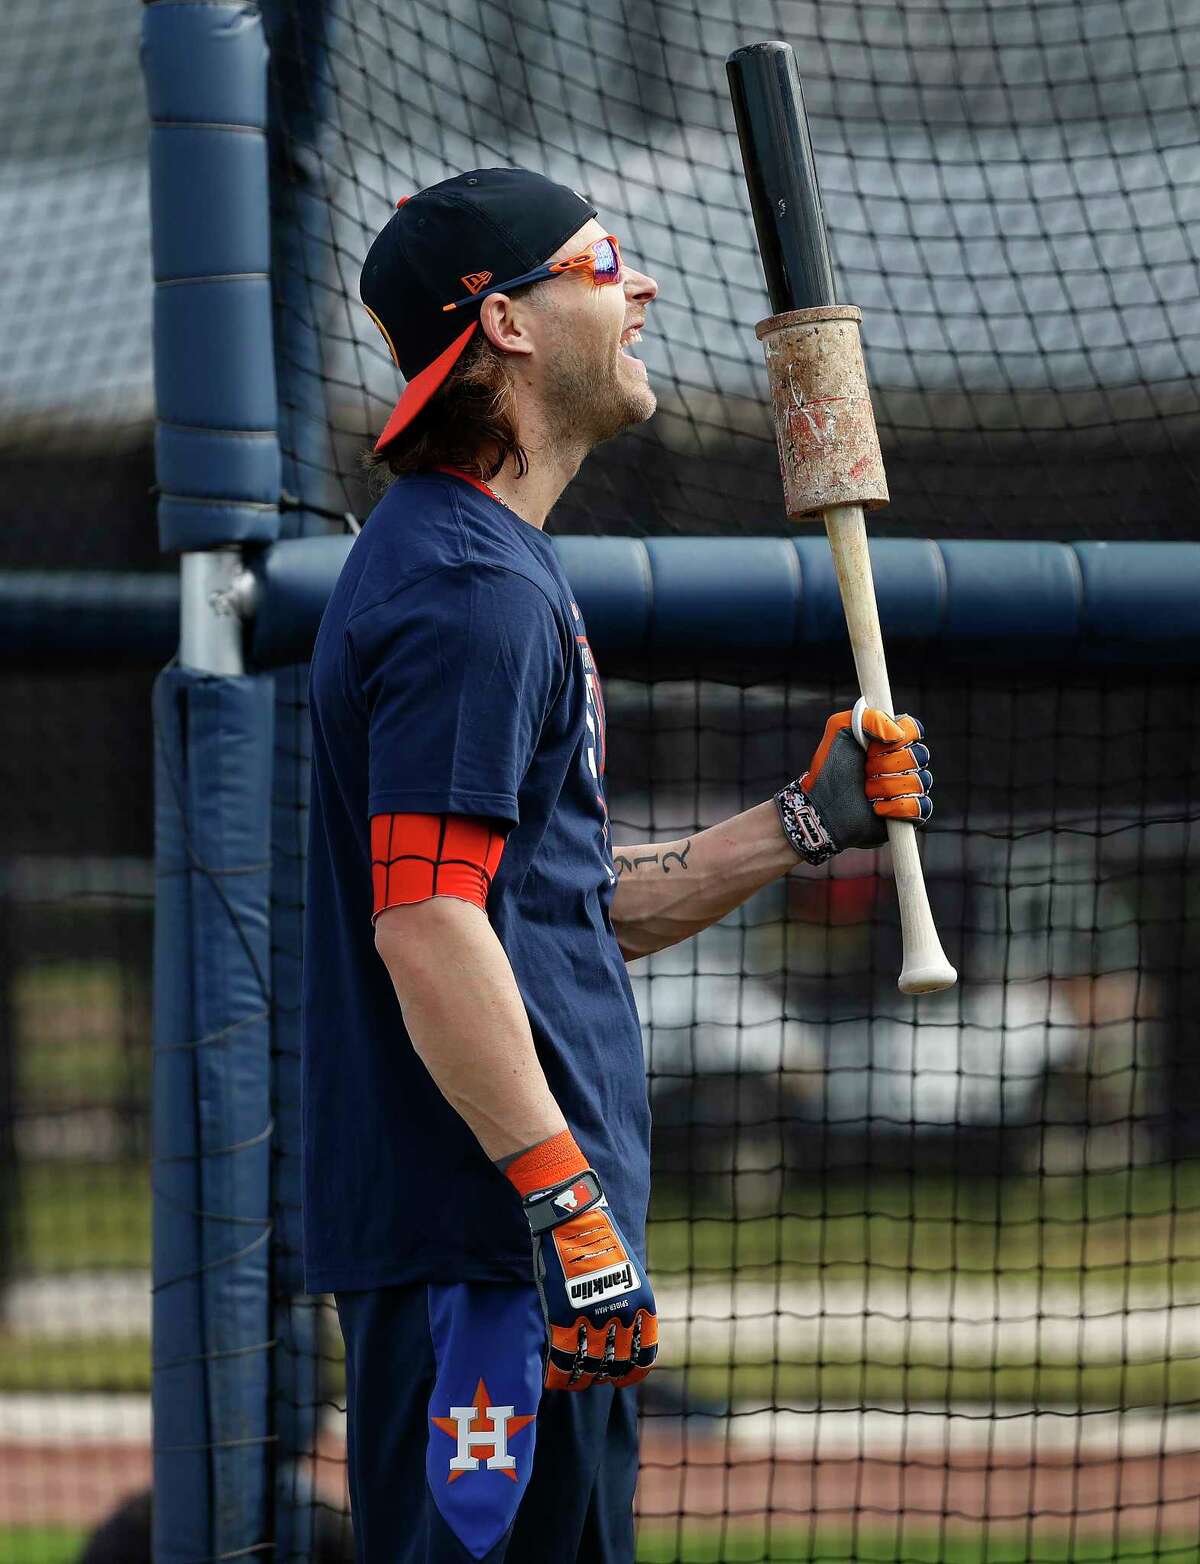 Josh Reddick, with Spider-Man shirt sleeve visible, waits to hit during a recent batting practice. The right fielder had a solid regular season and ALDS, but was 5-for-49 in the ALCS and World Series.